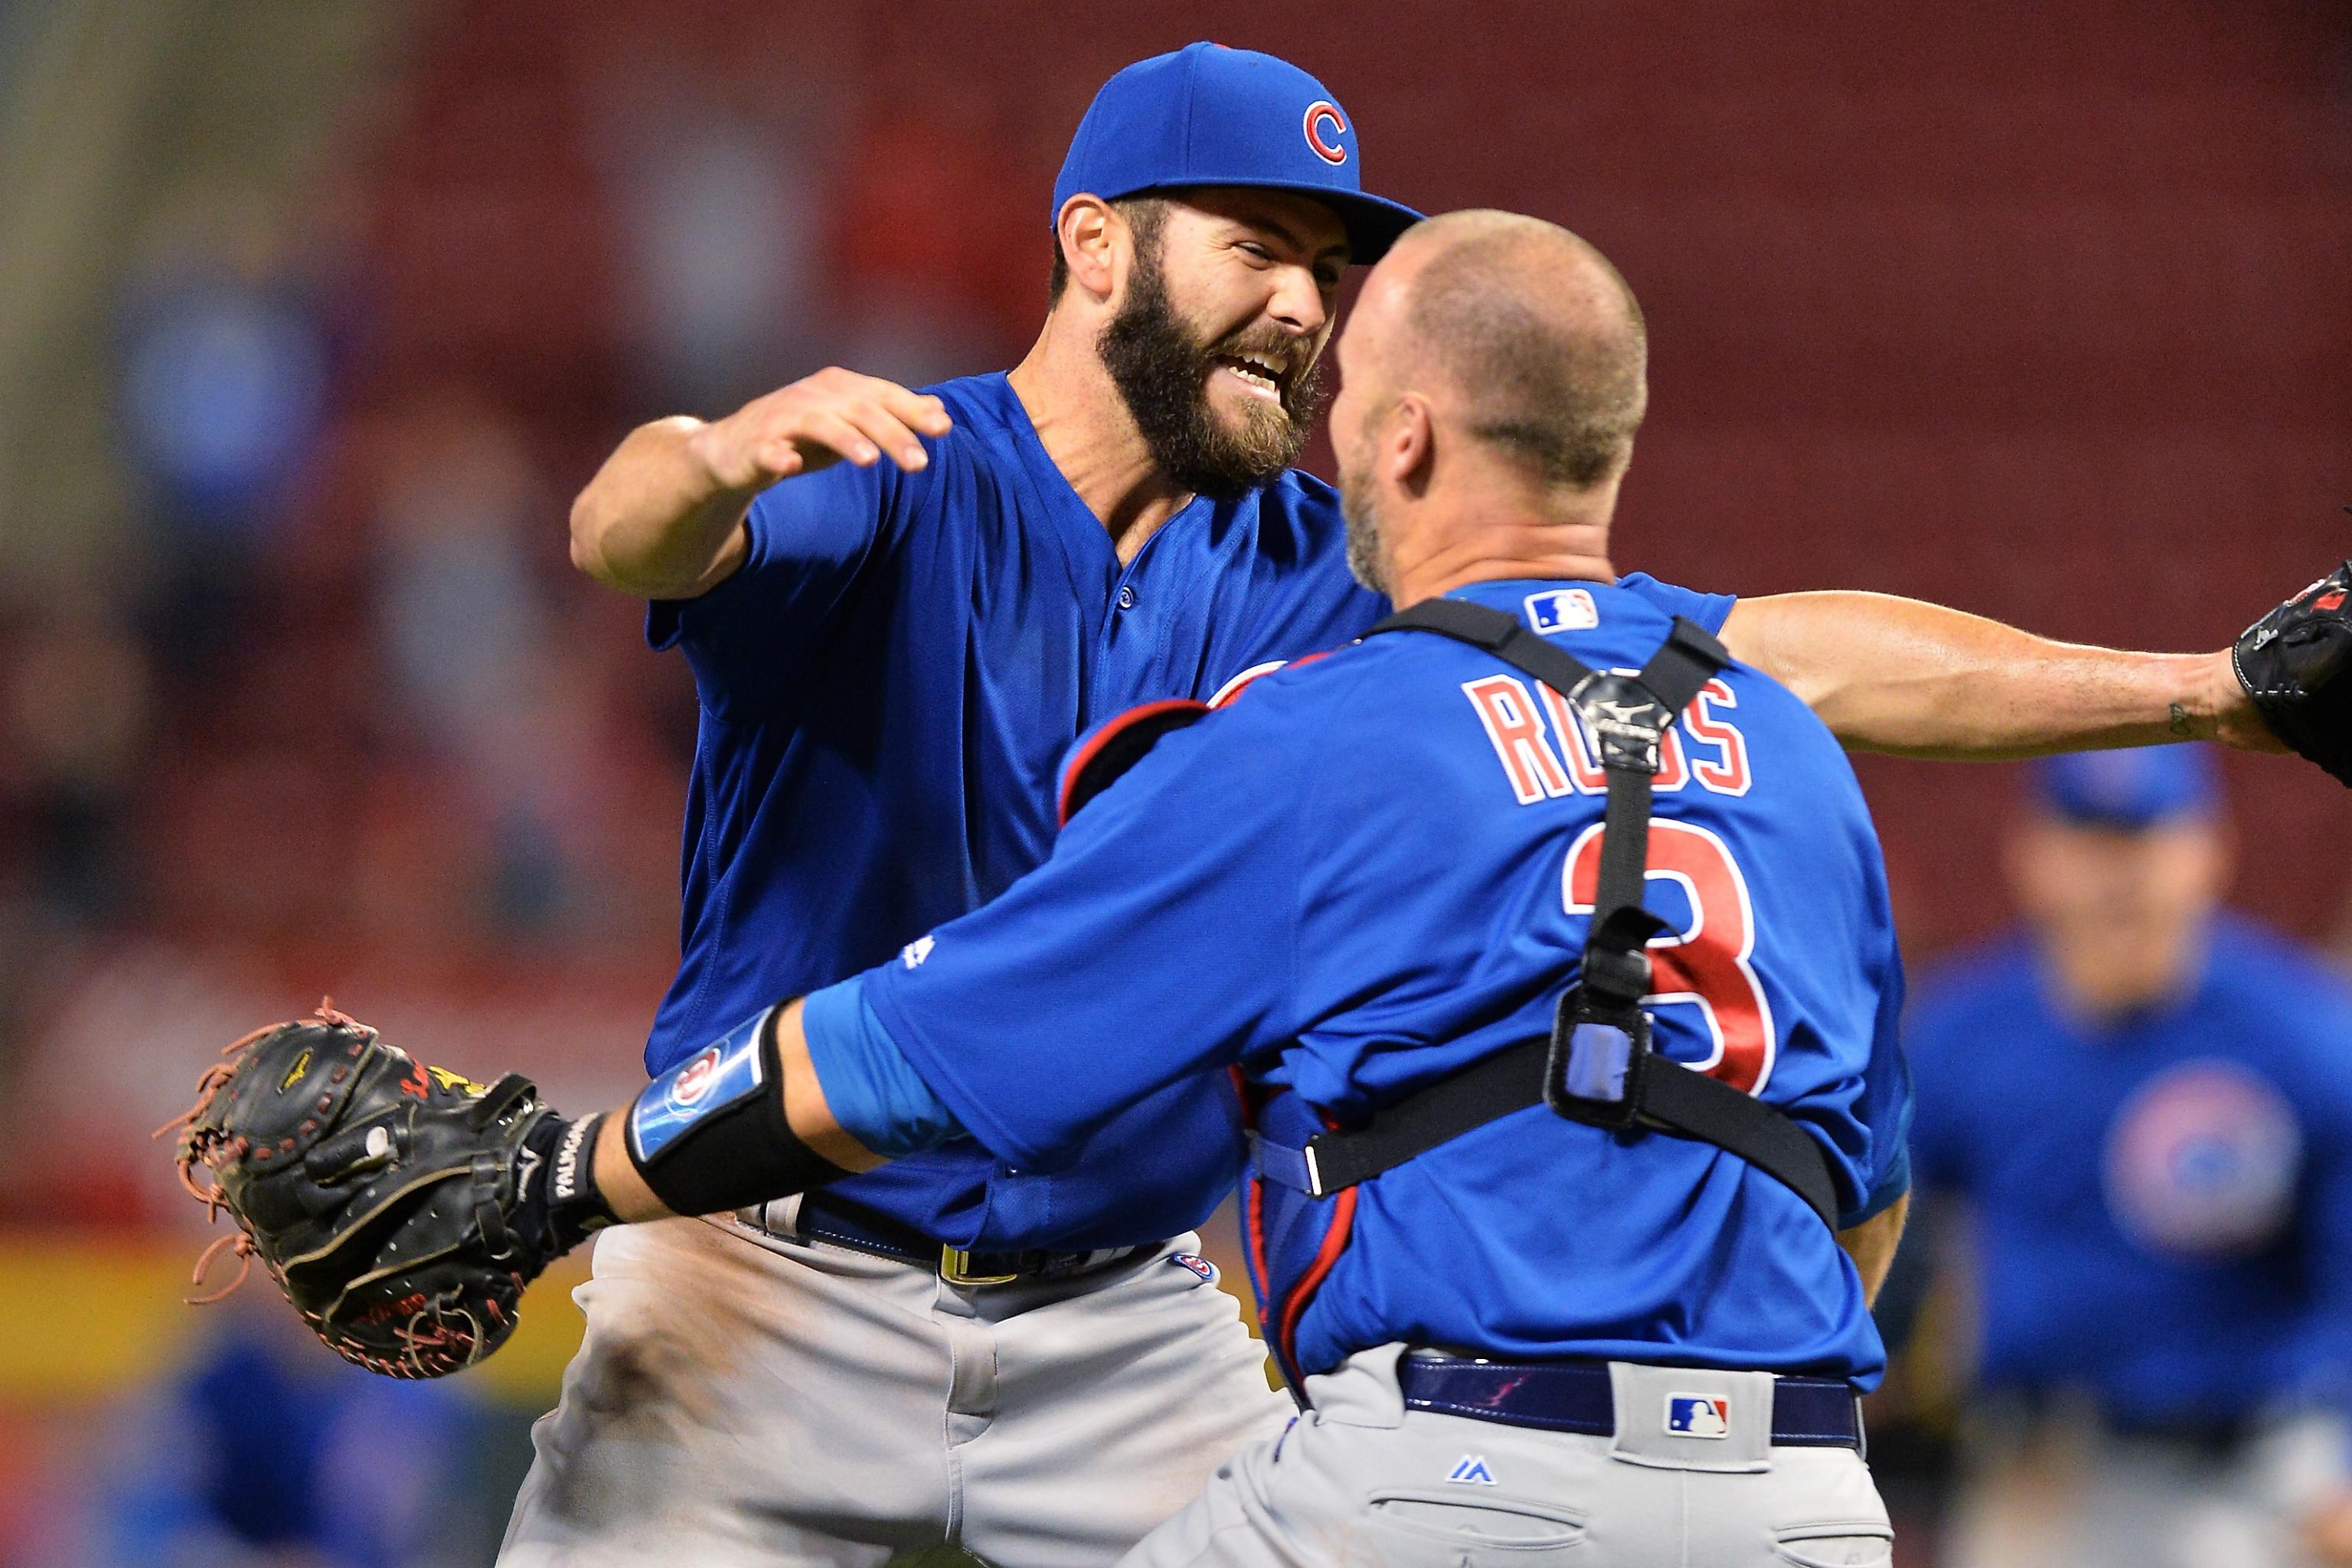 Cubs' Jake Arrieta tosses no-hitter against Dodgers – Daily News